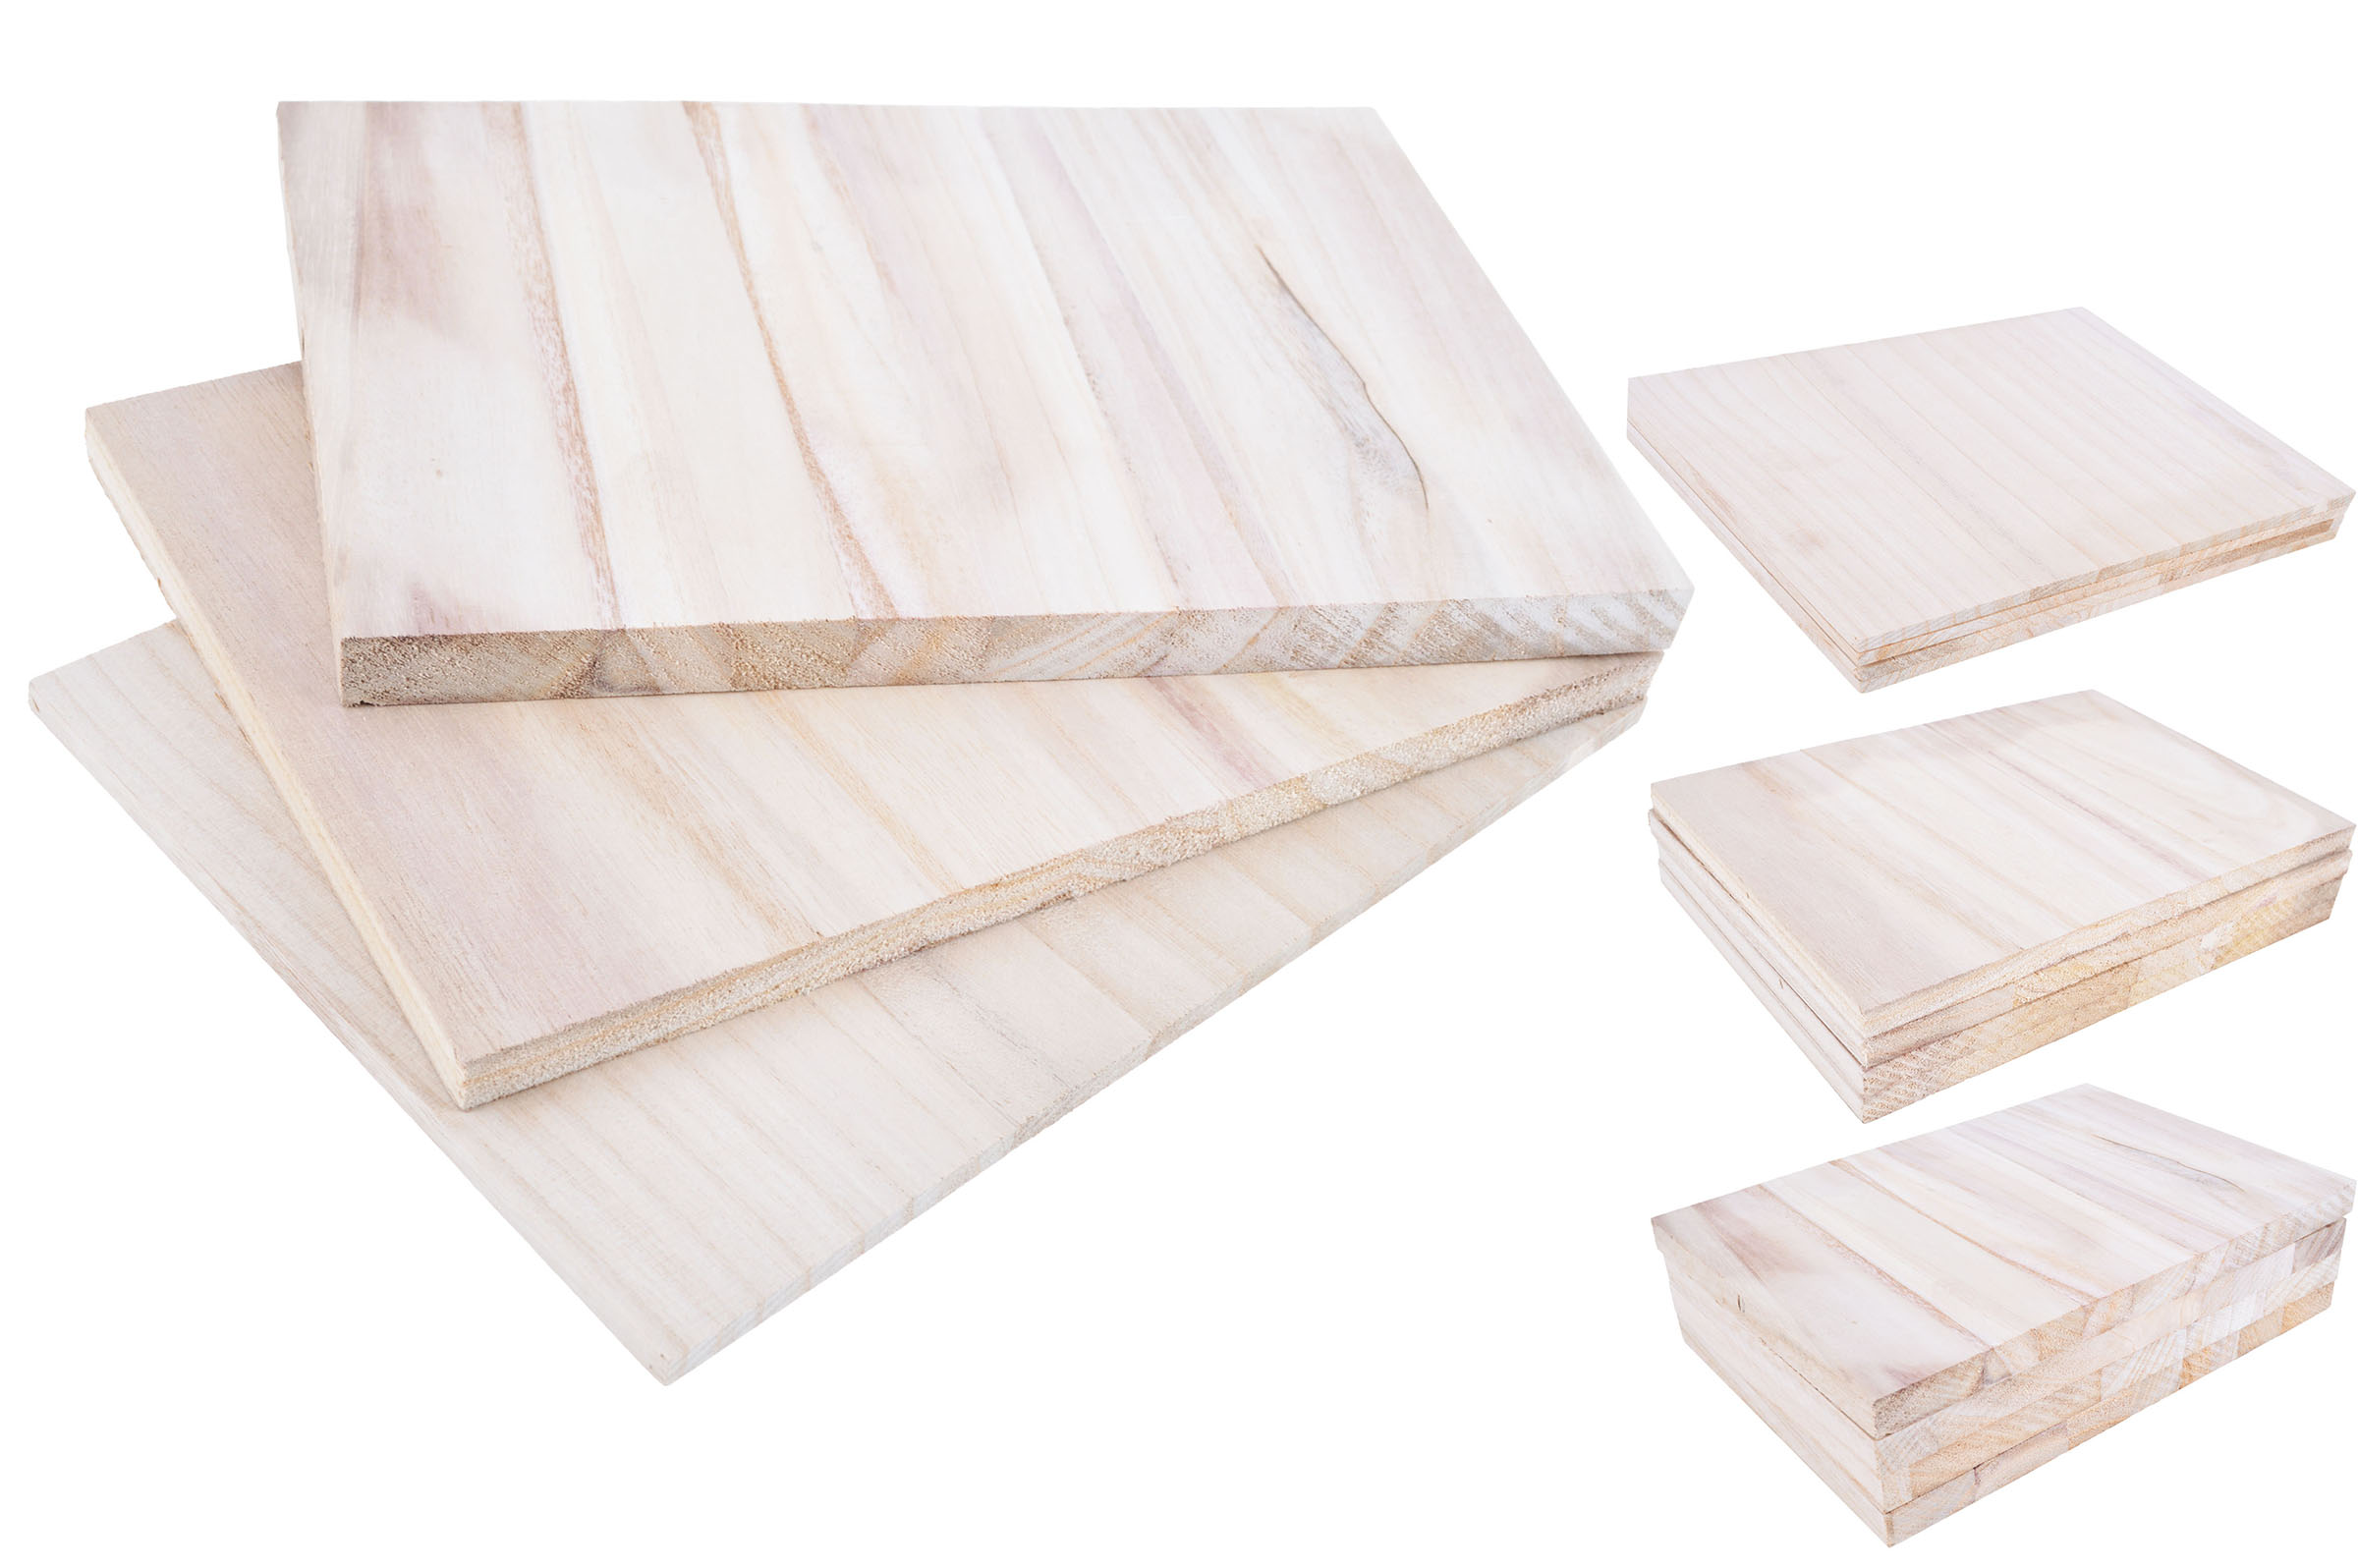 25 Wooden Wood Breaking Boards Breakable Tkd Martial Arts Pinewood 1 inch thick 